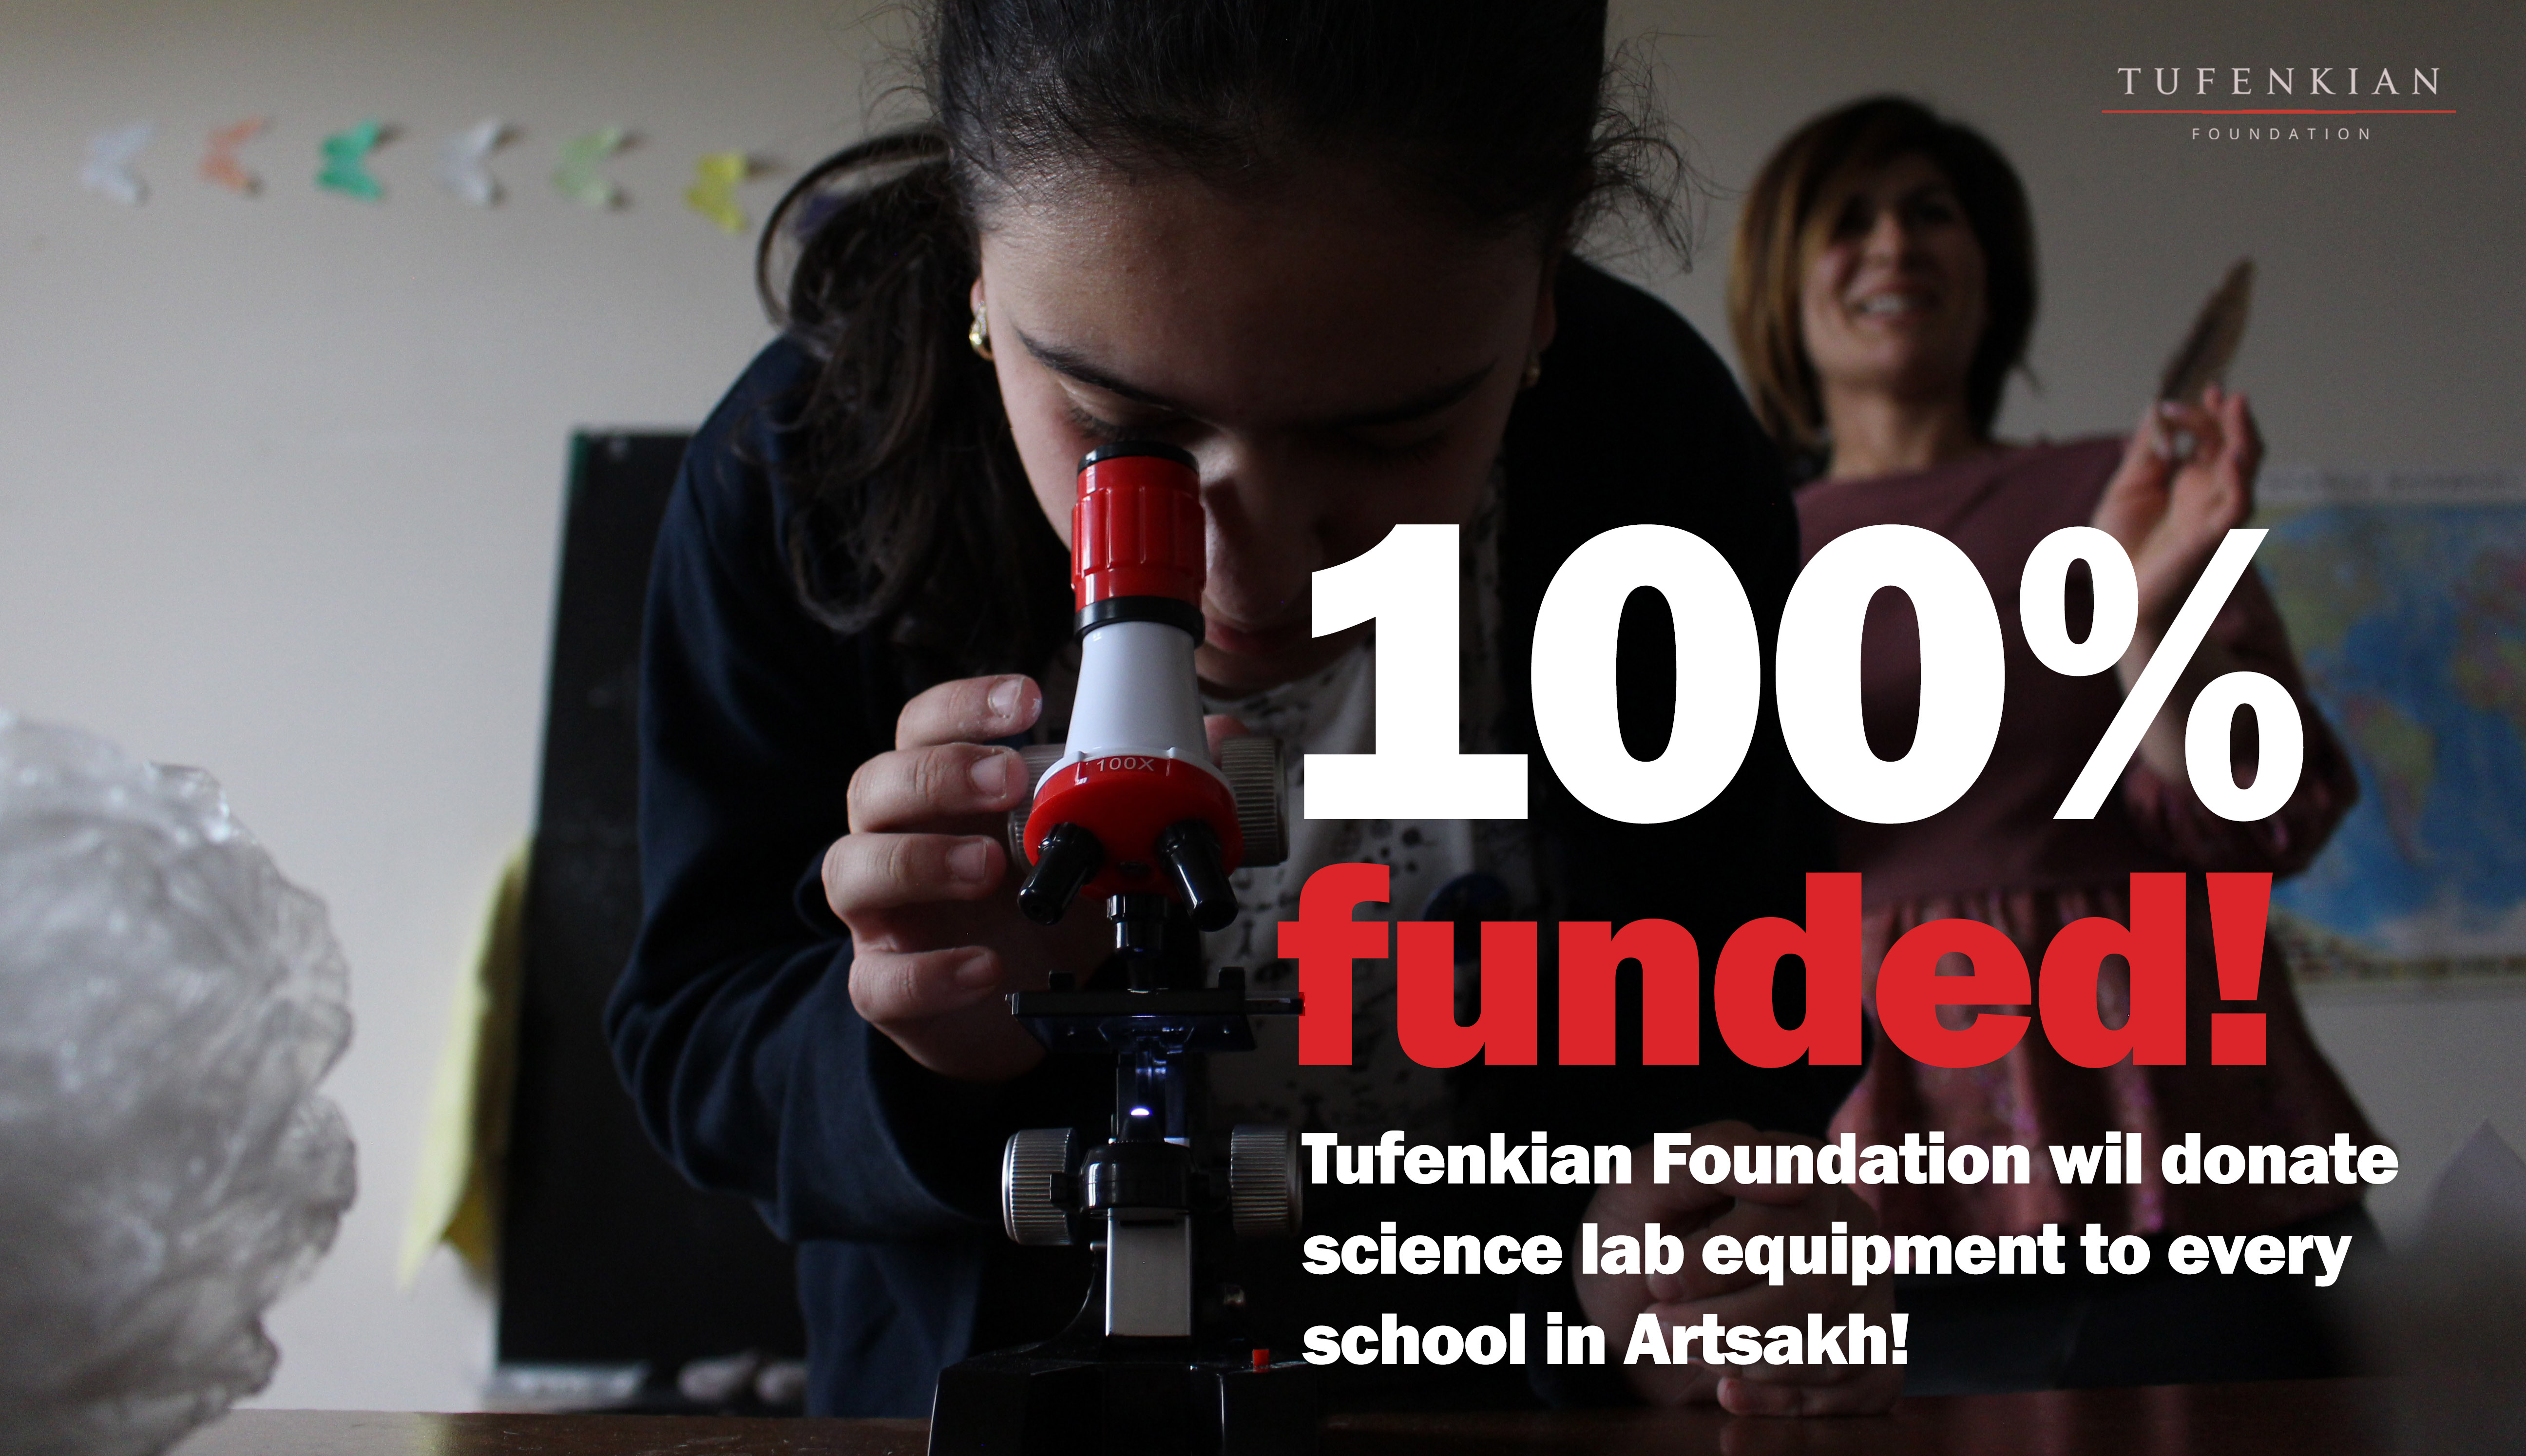 Tufenkian Foundation to donate science lab equipment to every school in Artsakh